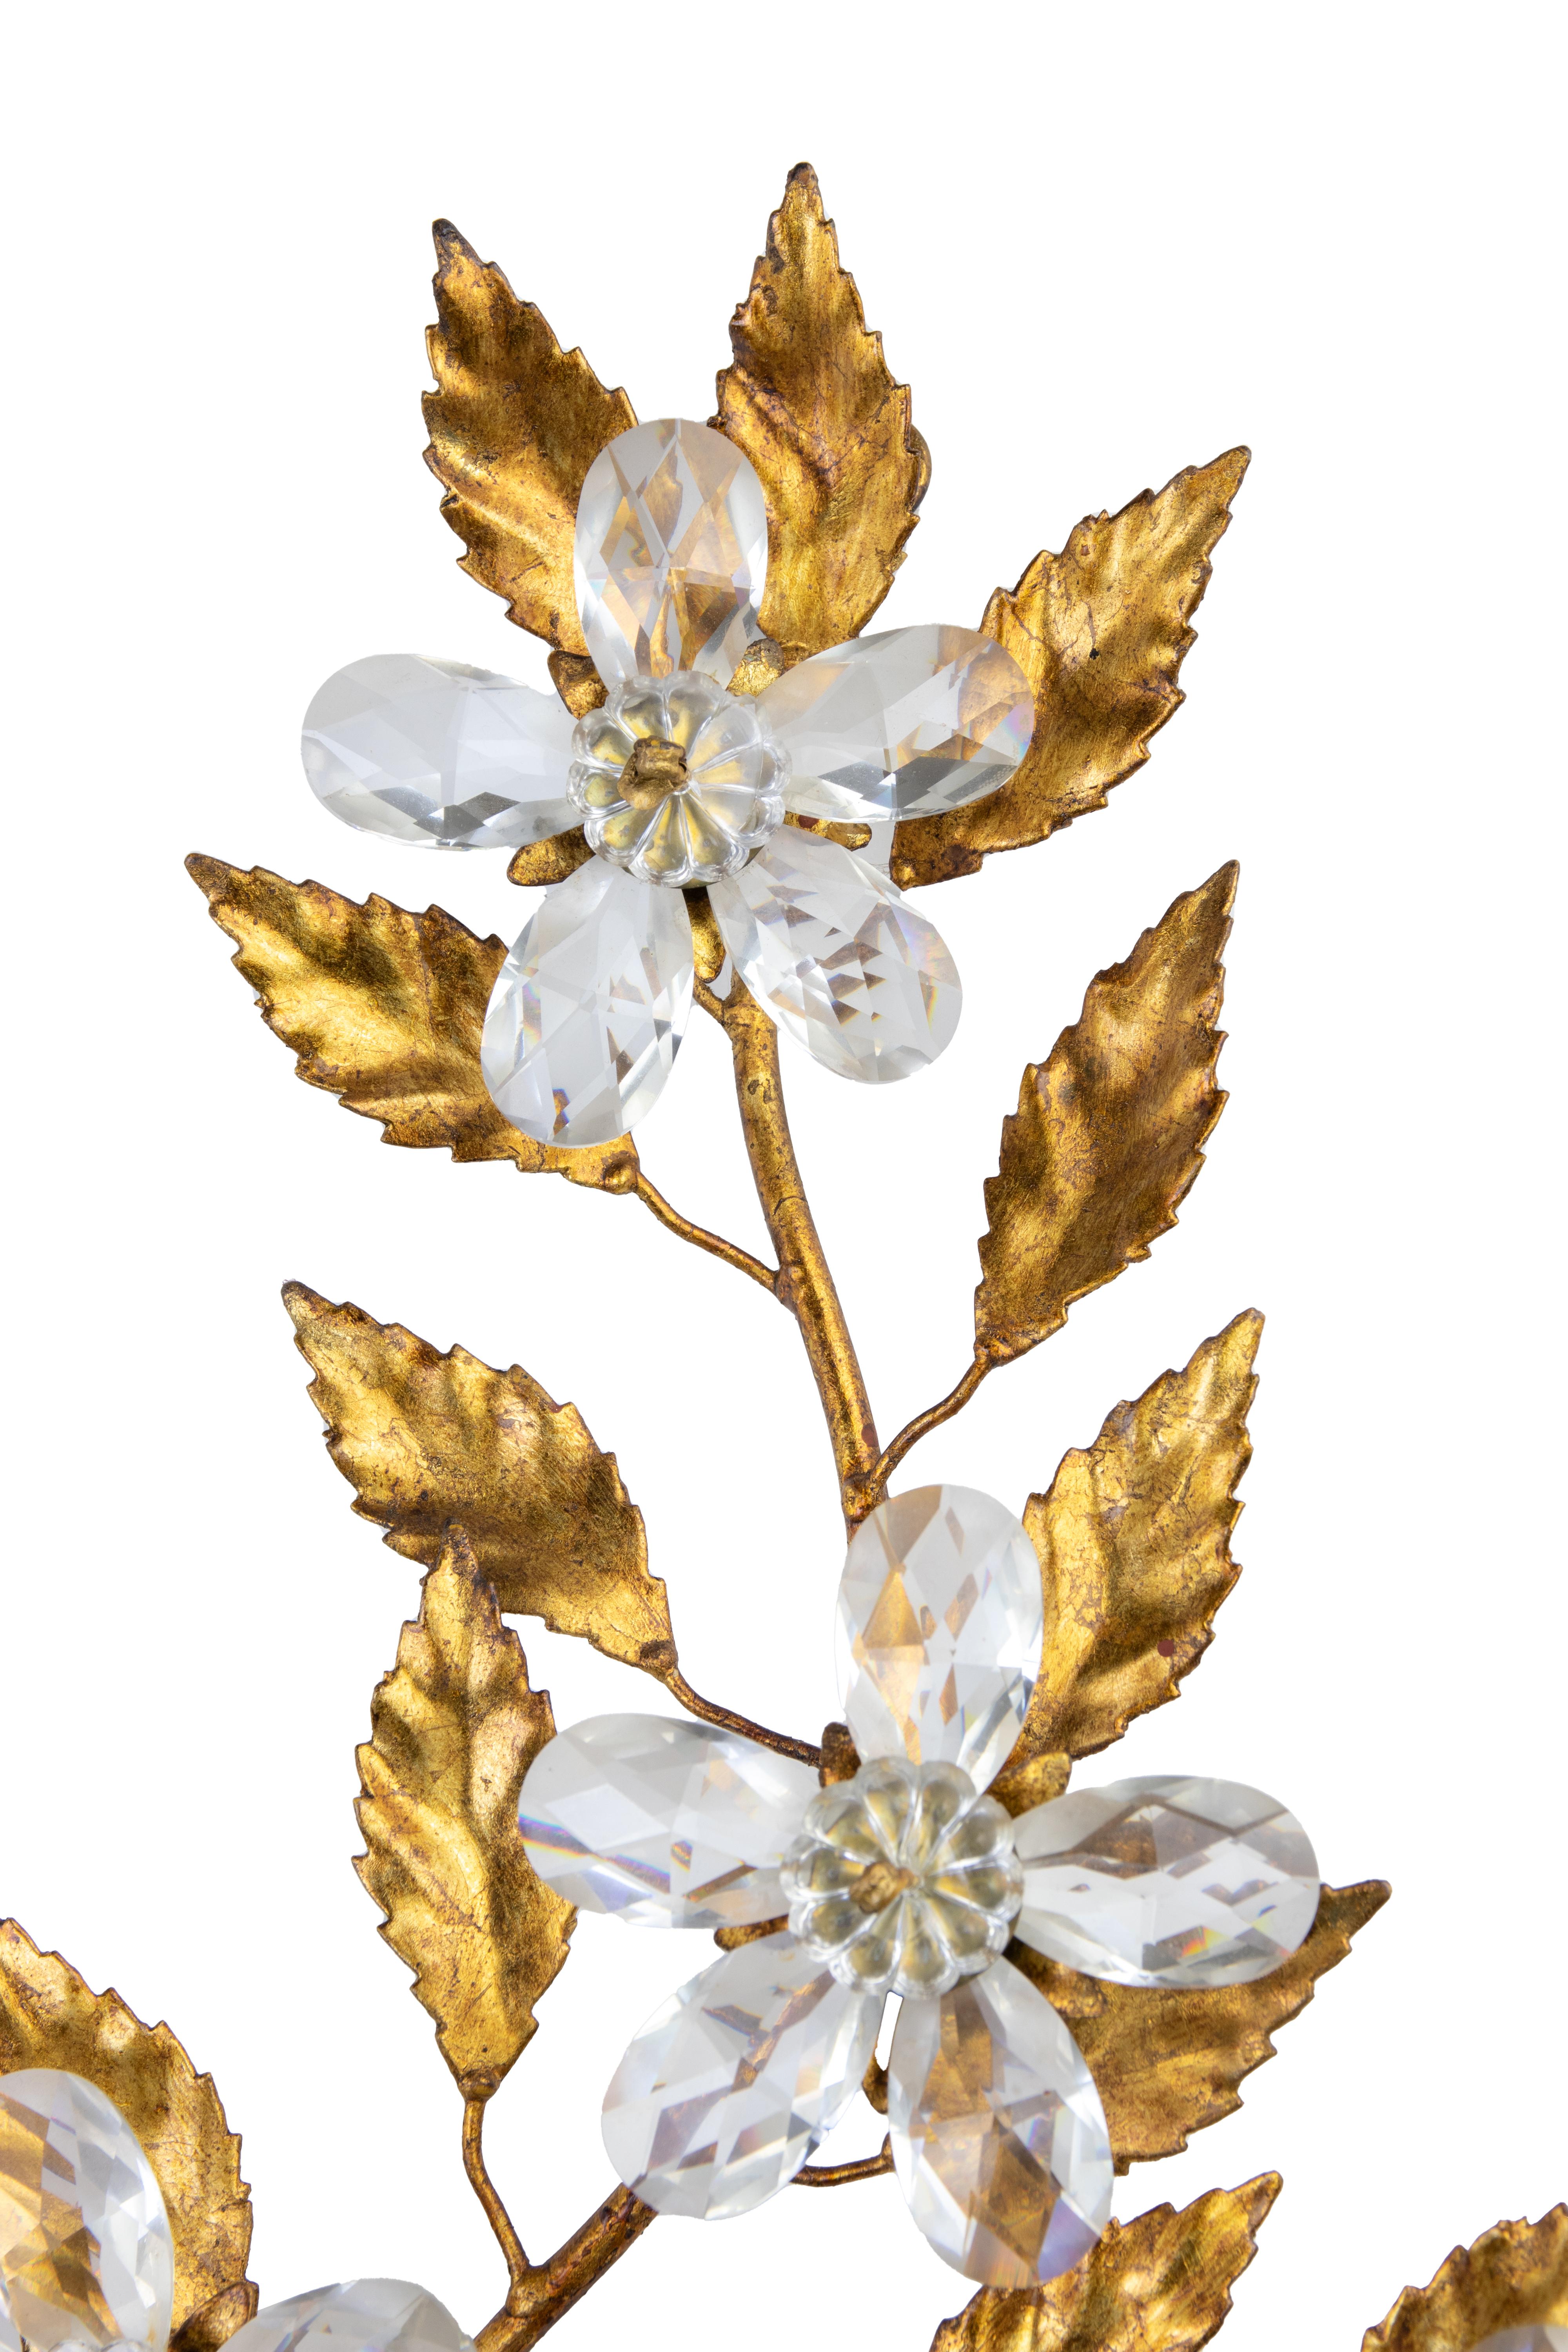 Gilded Brass Applique in the style of Hans Kogl, late 20th Century.

2 lights, with cristal drops in the shape of flowers.

60 x 48 cm.

Very good condition. 